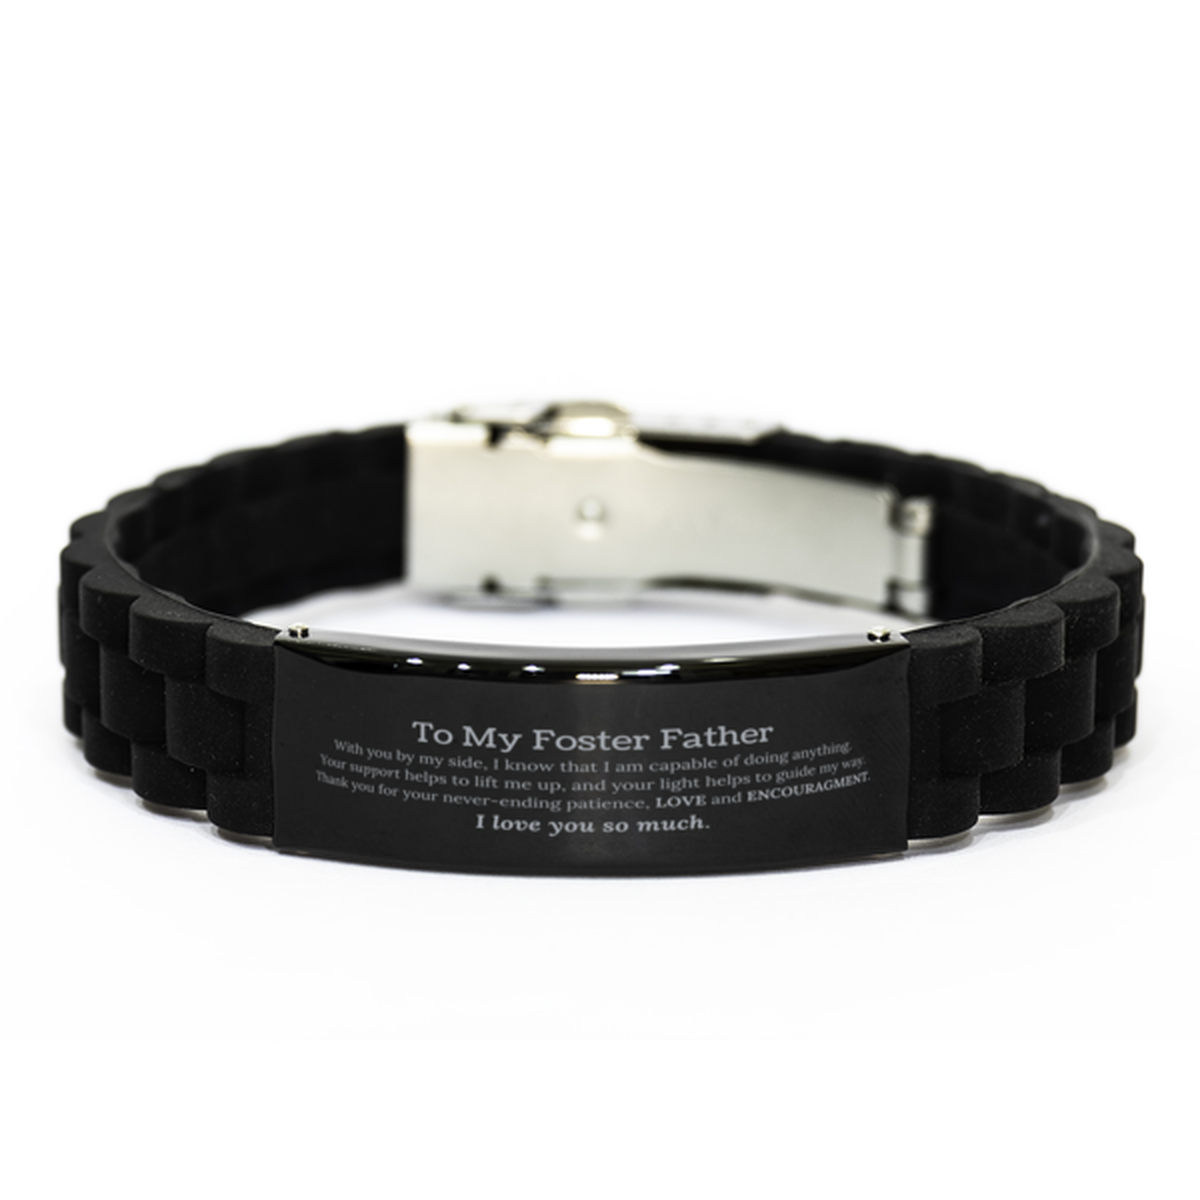 Appreciation Foster Father Black Glidelock Clasp Bracelet Gifts, To My Foster Father Birthday Christmas Wedding Keepsake Gifts for Foster Father With you by my side, I know that I am capable of doing anything. I love you so much